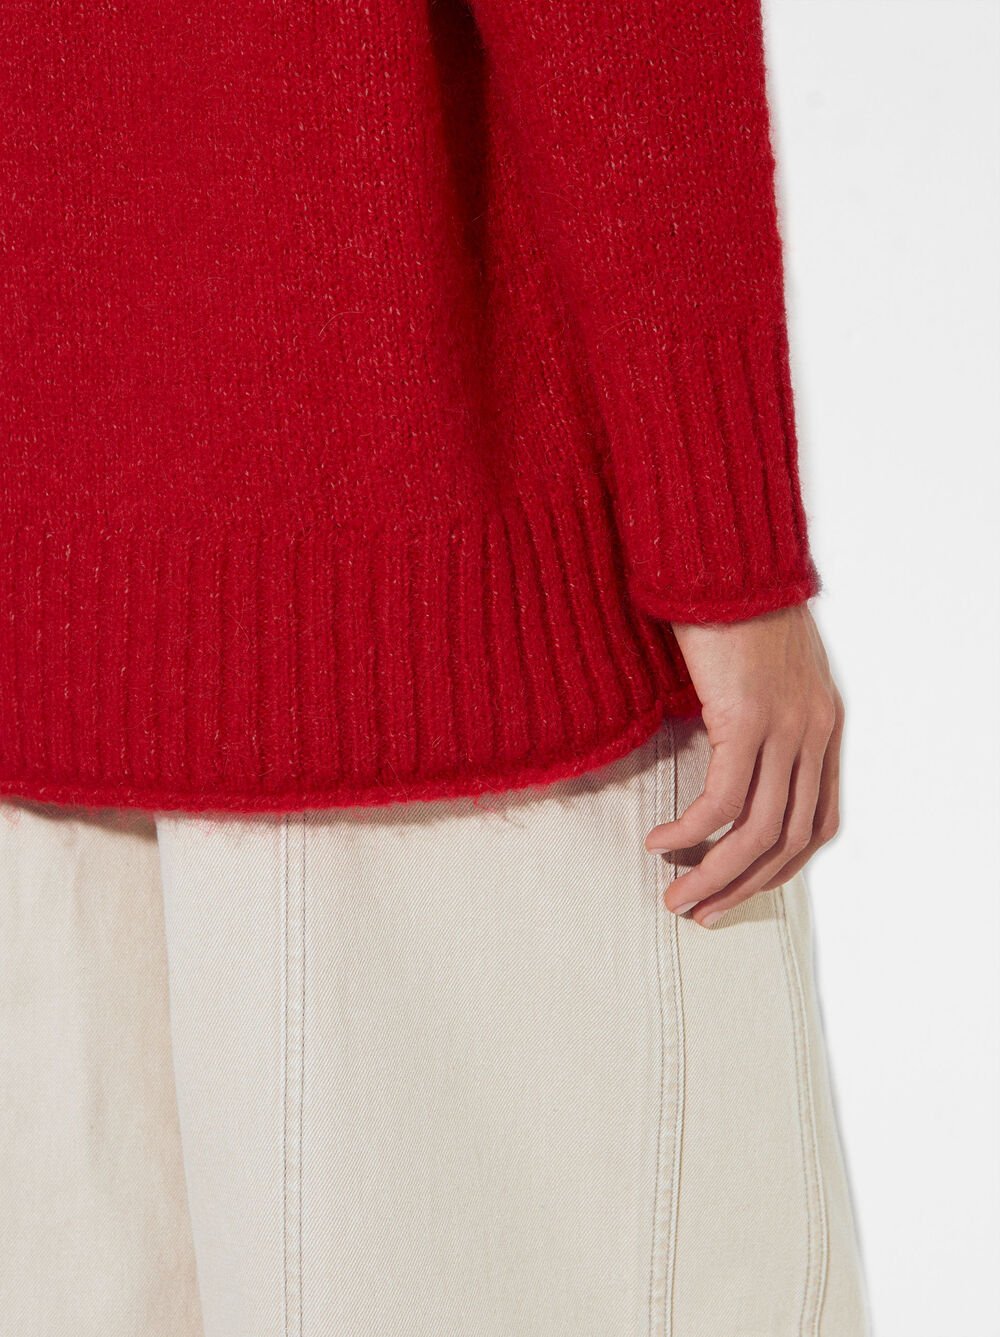 Online Exclusive - Knit Sweater With Wool